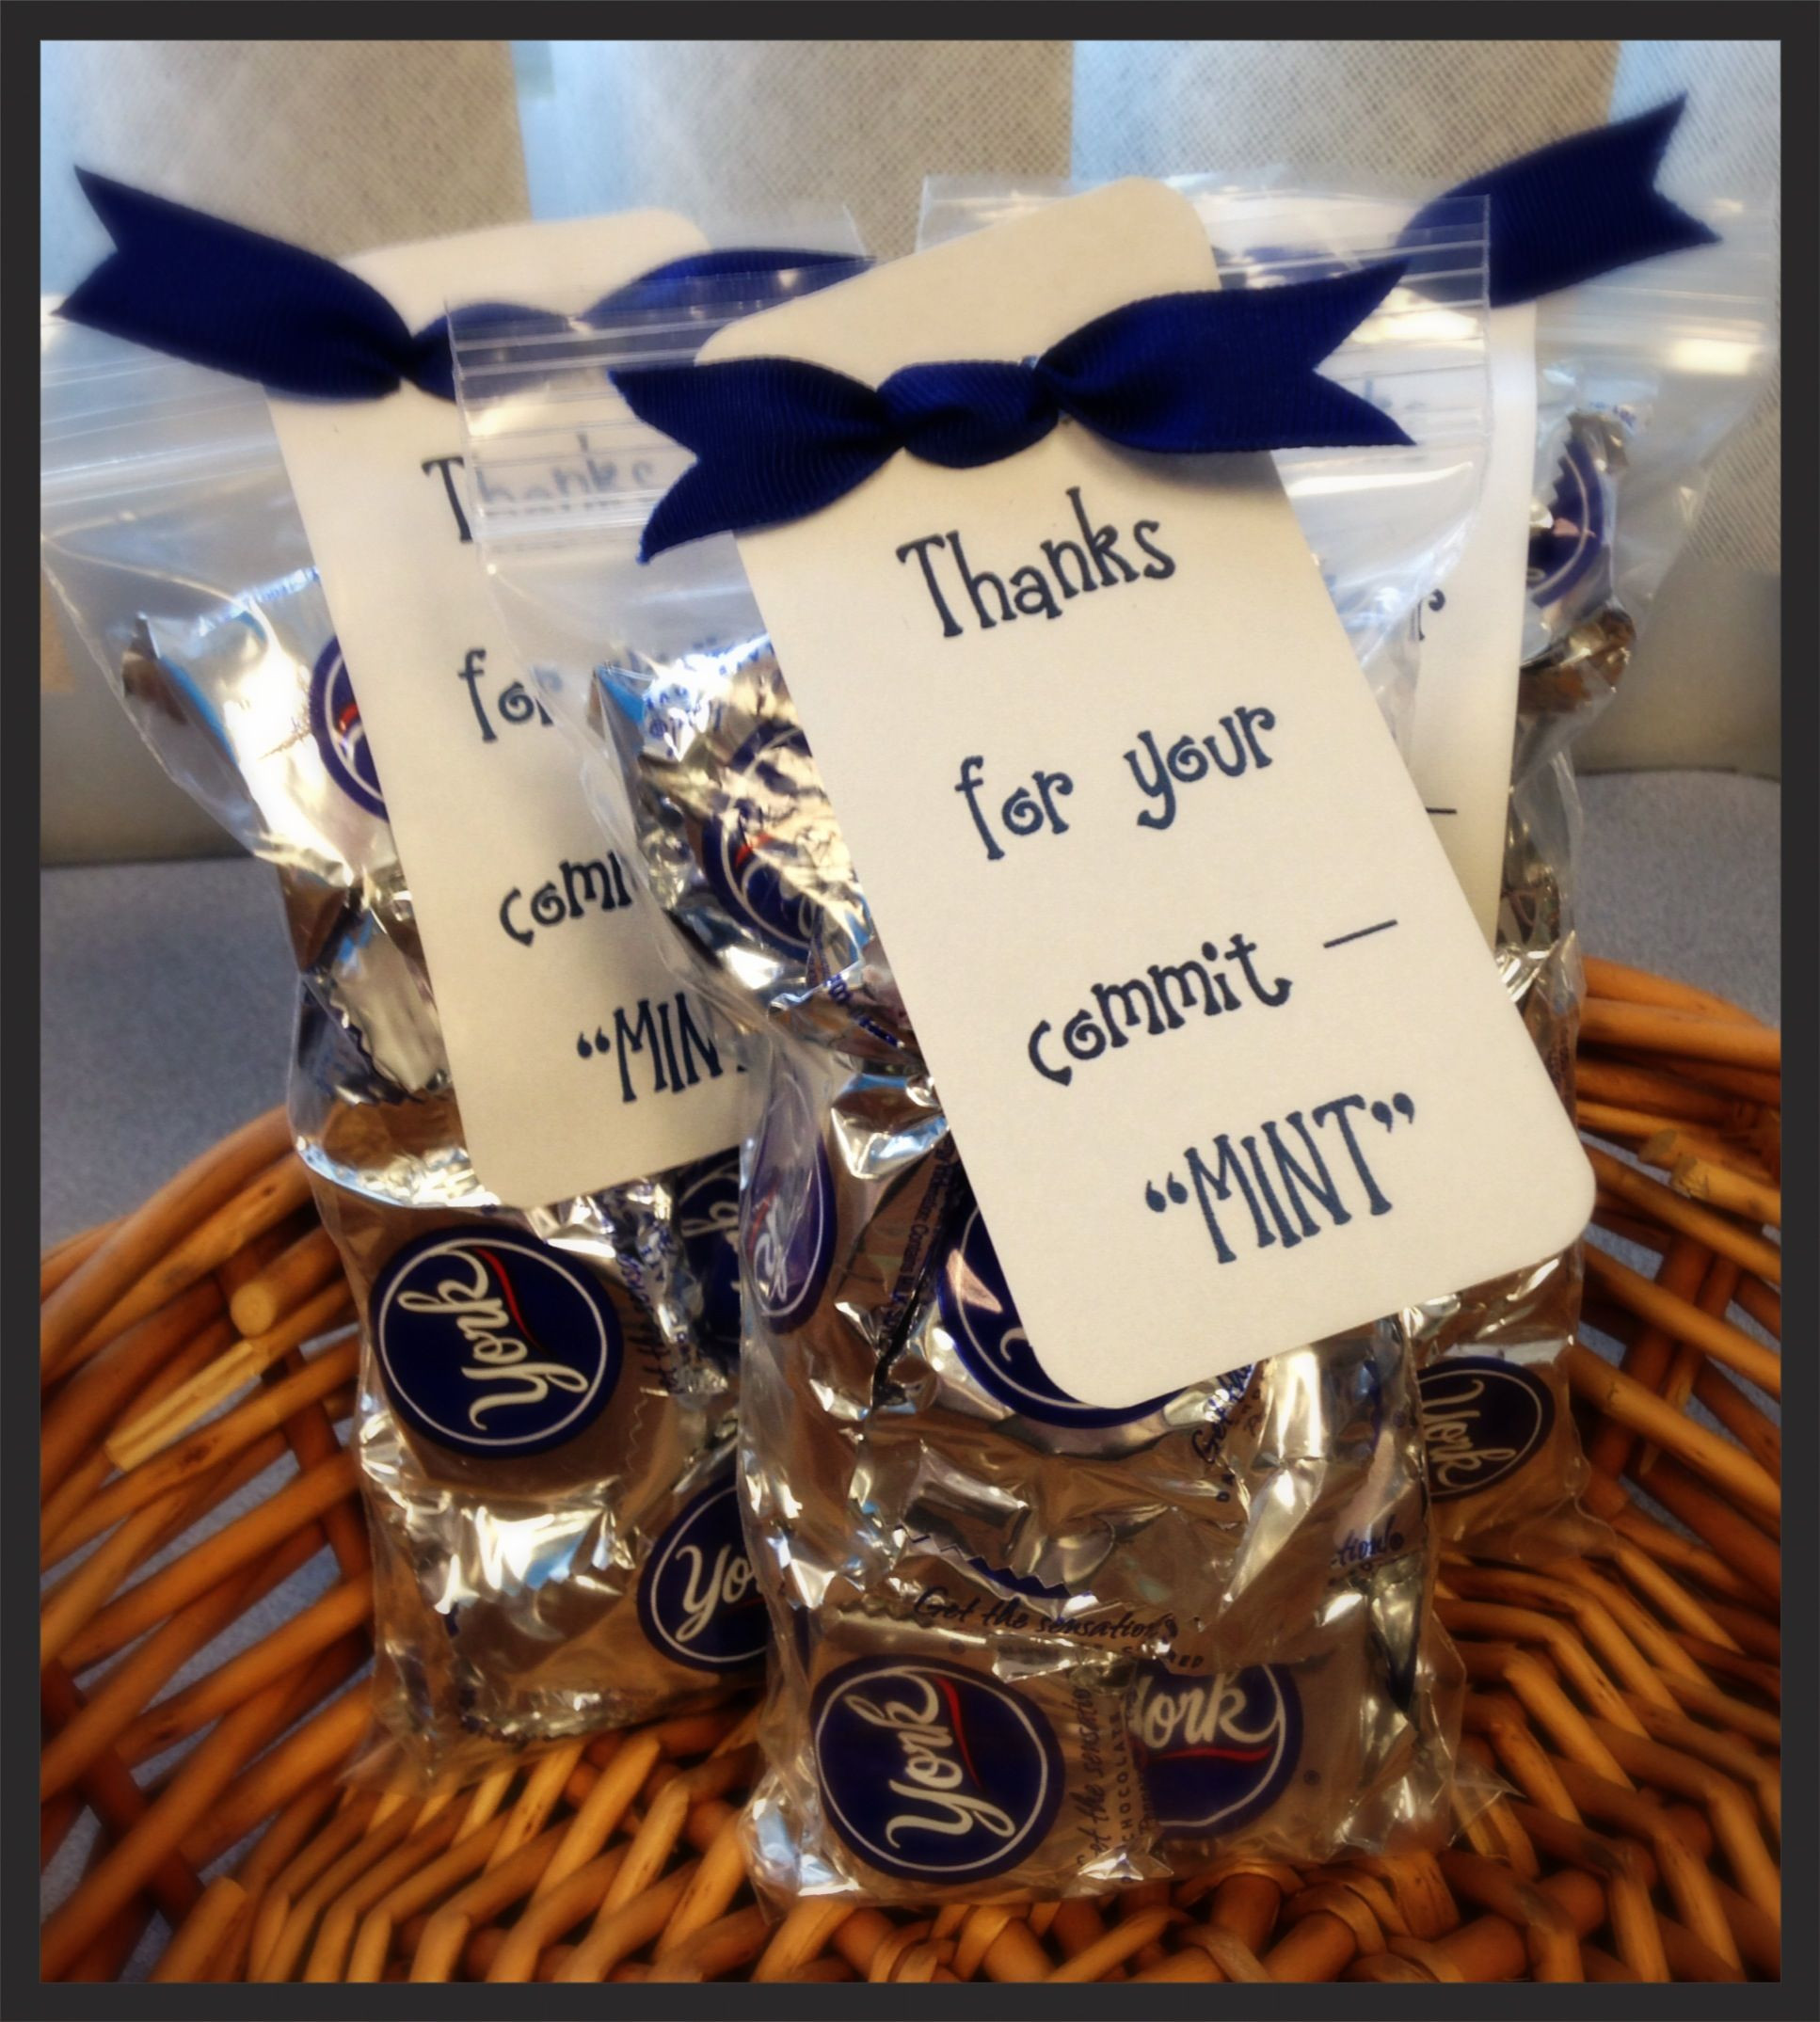 Employee Thank You Gift Ideas
 Thanks for your mitment t for our counselors So